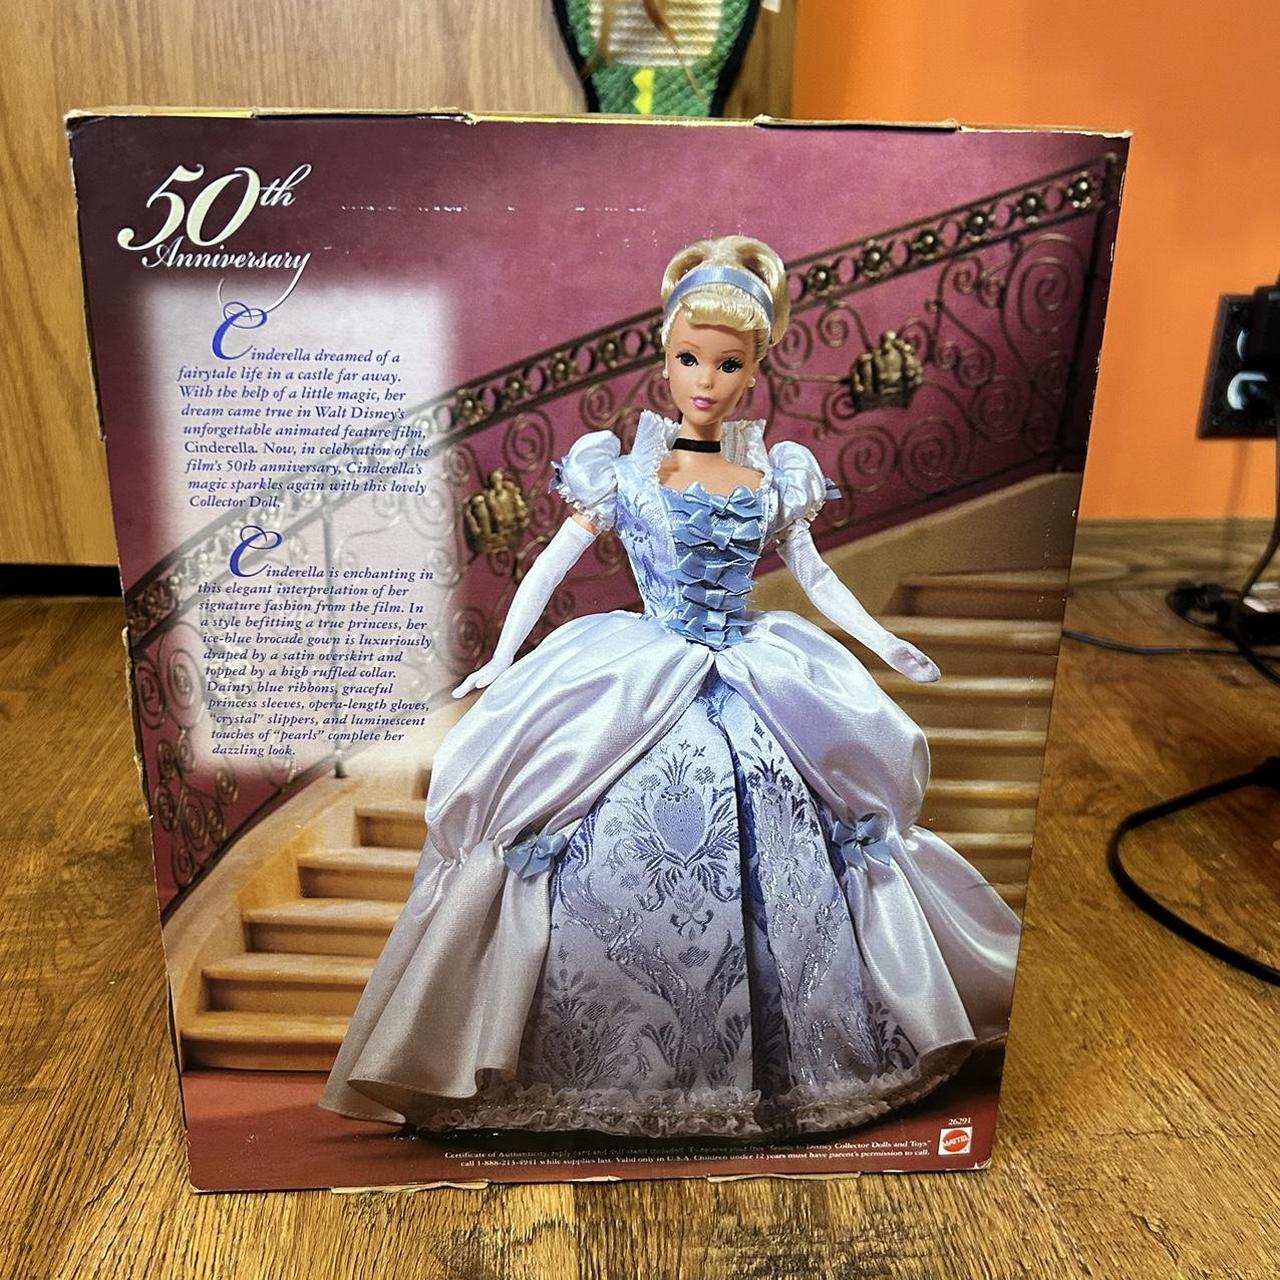 Disney Princess Barbie doll collectibles from 1990's - Depop